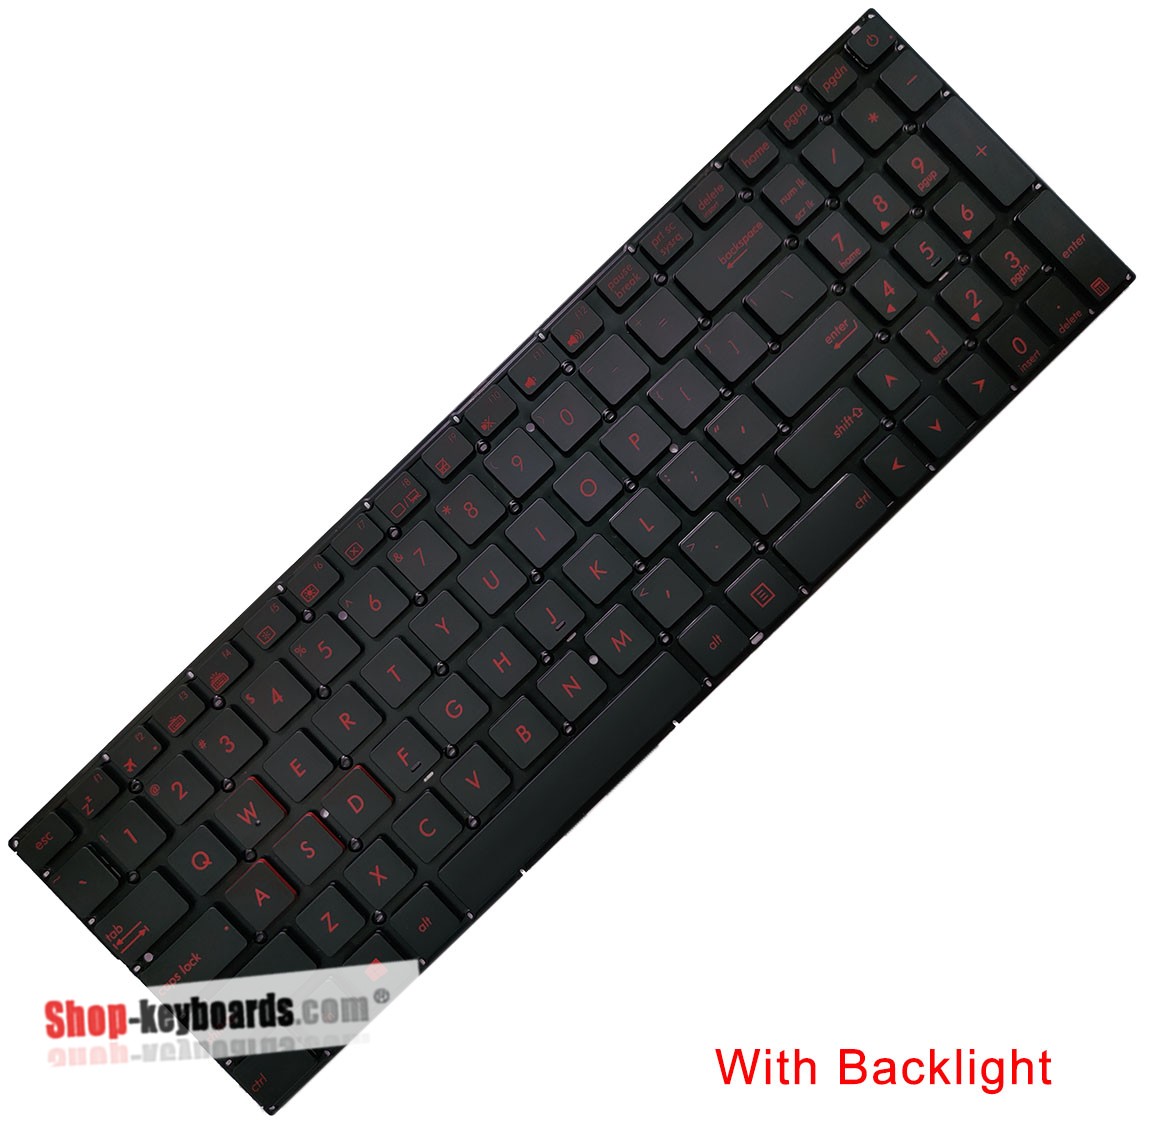 Asus UX501VW-FZ196T  Keyboard replacement